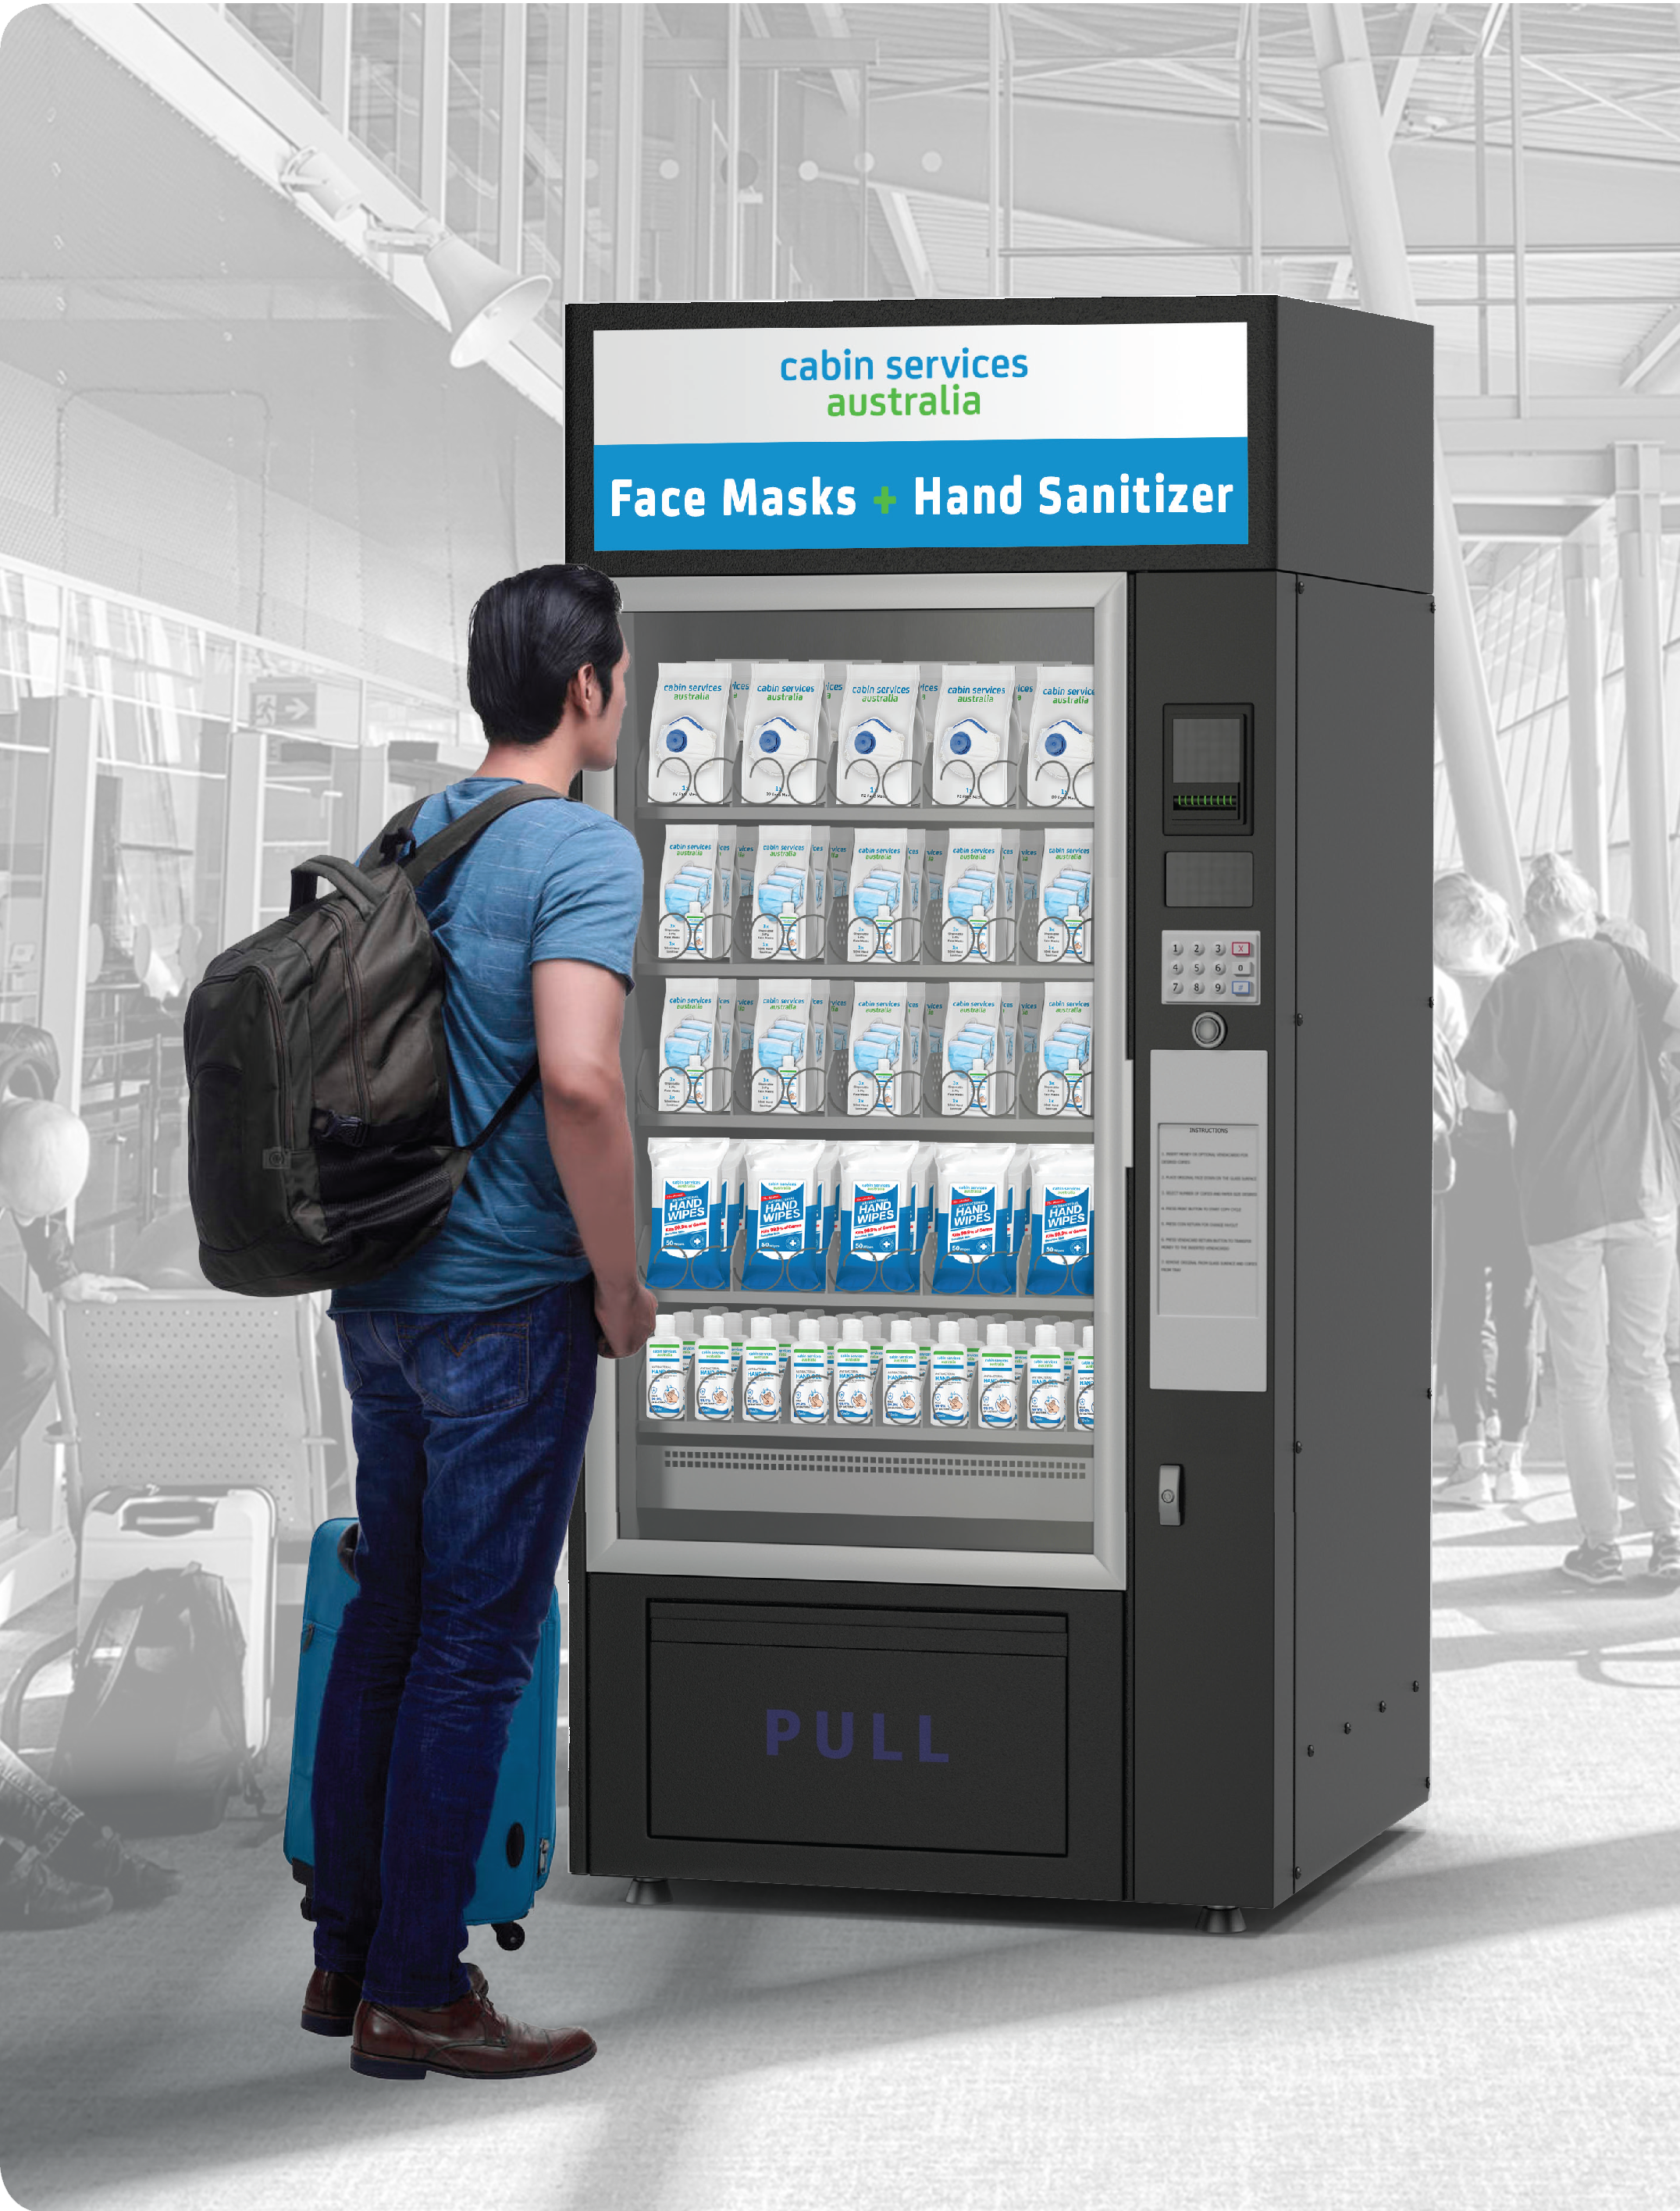 Personal Protection Equipment (PPE) Vending Machines - Cabin Services